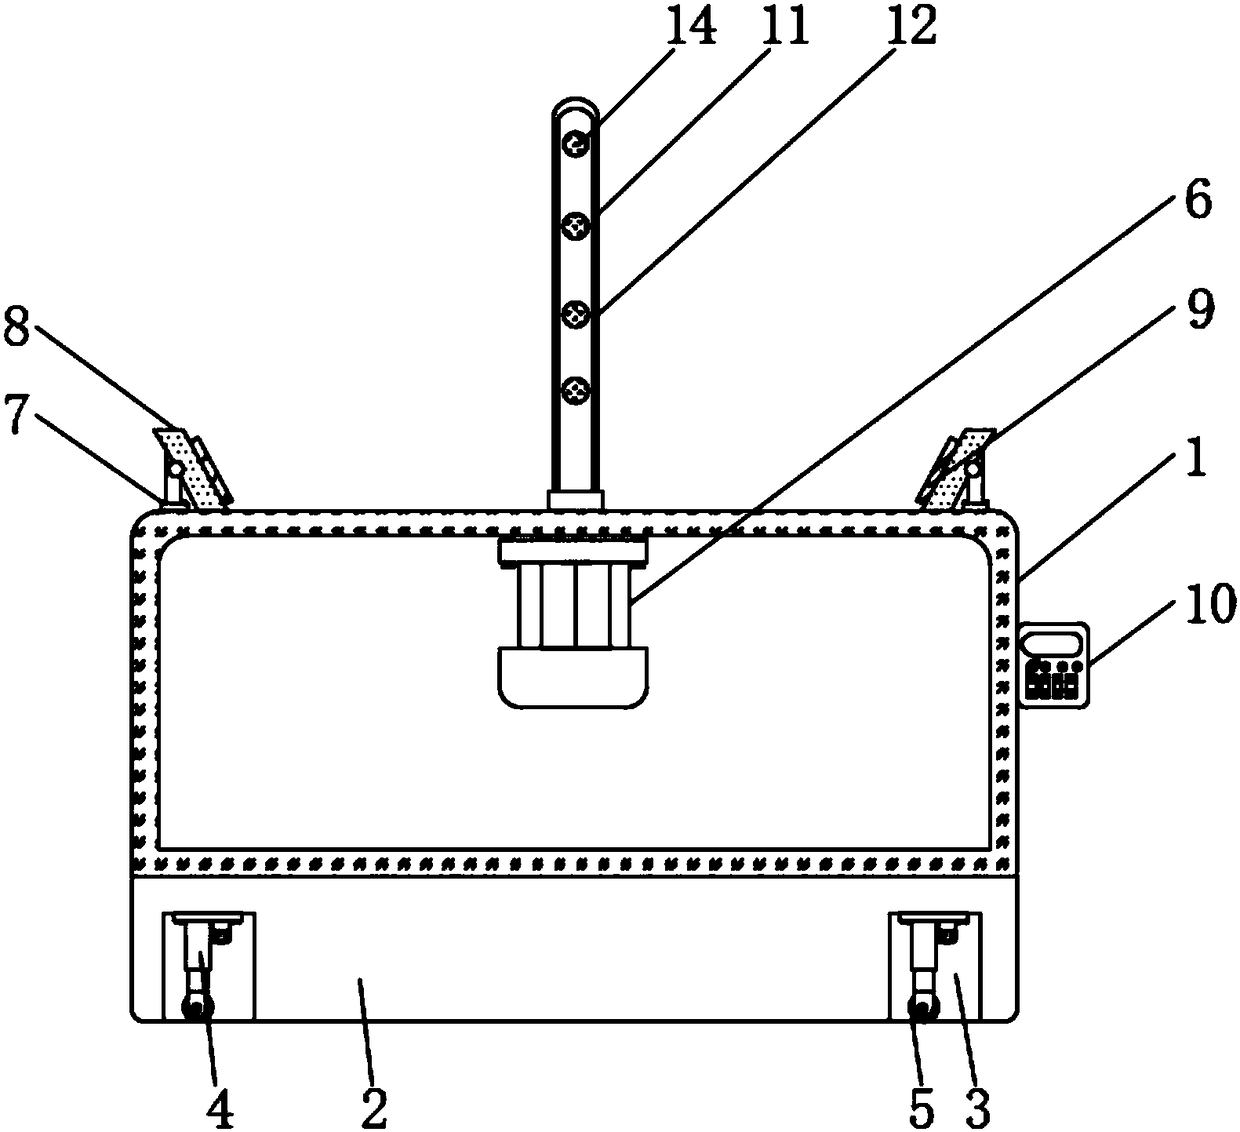 Display stand convenient for displaying garments